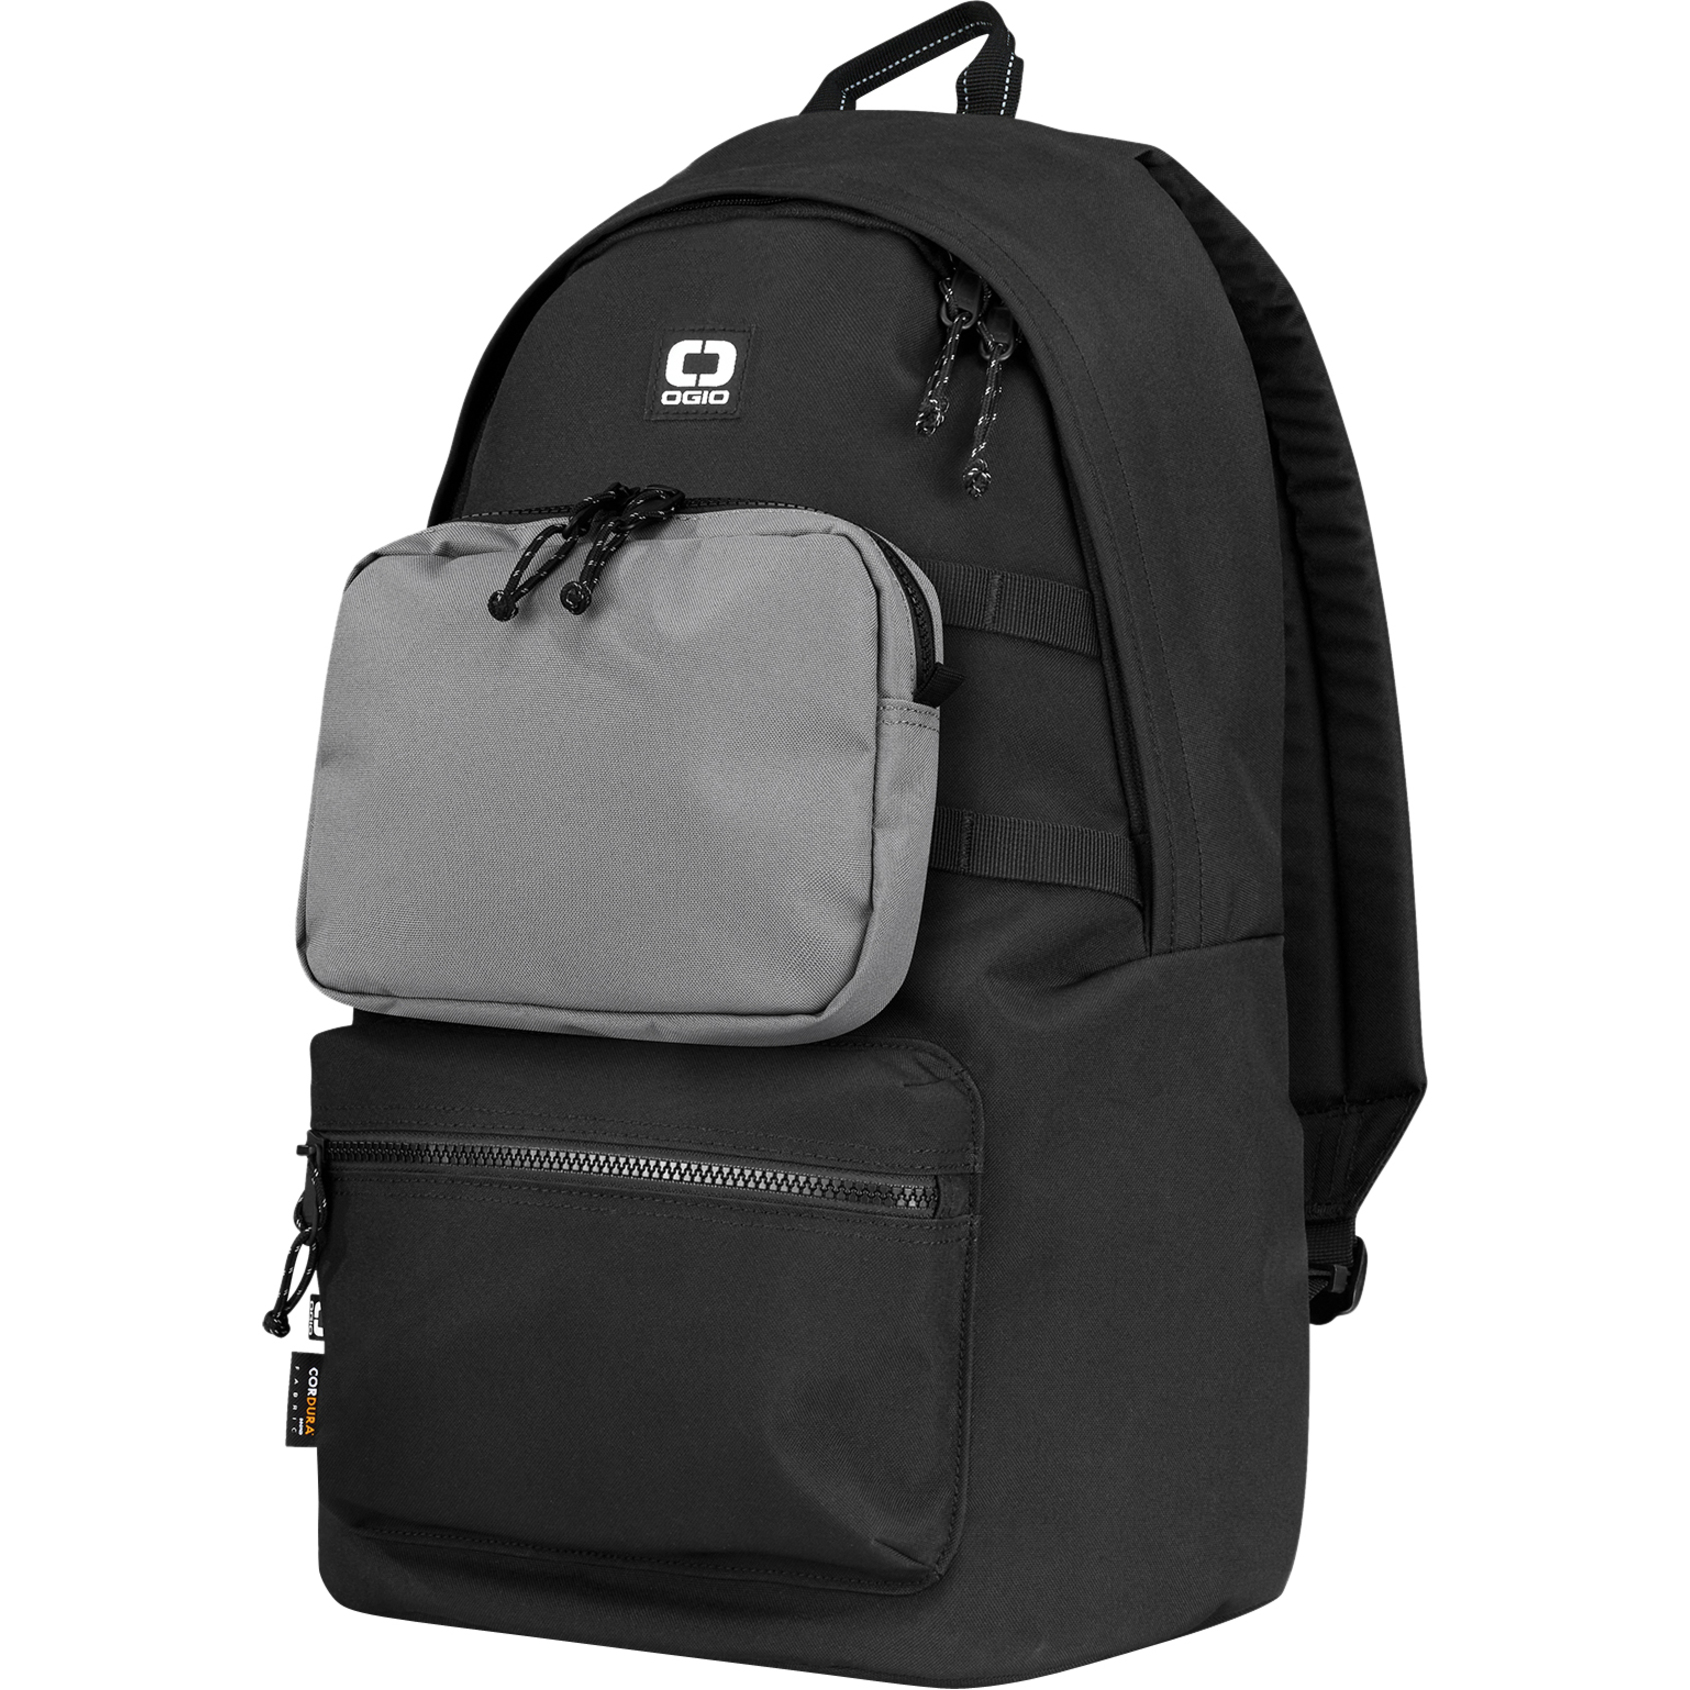 Ogio ALPHA Convoy 120 Carrying Case (Backpack) for 15" Notebook, Black - image 5 of 6